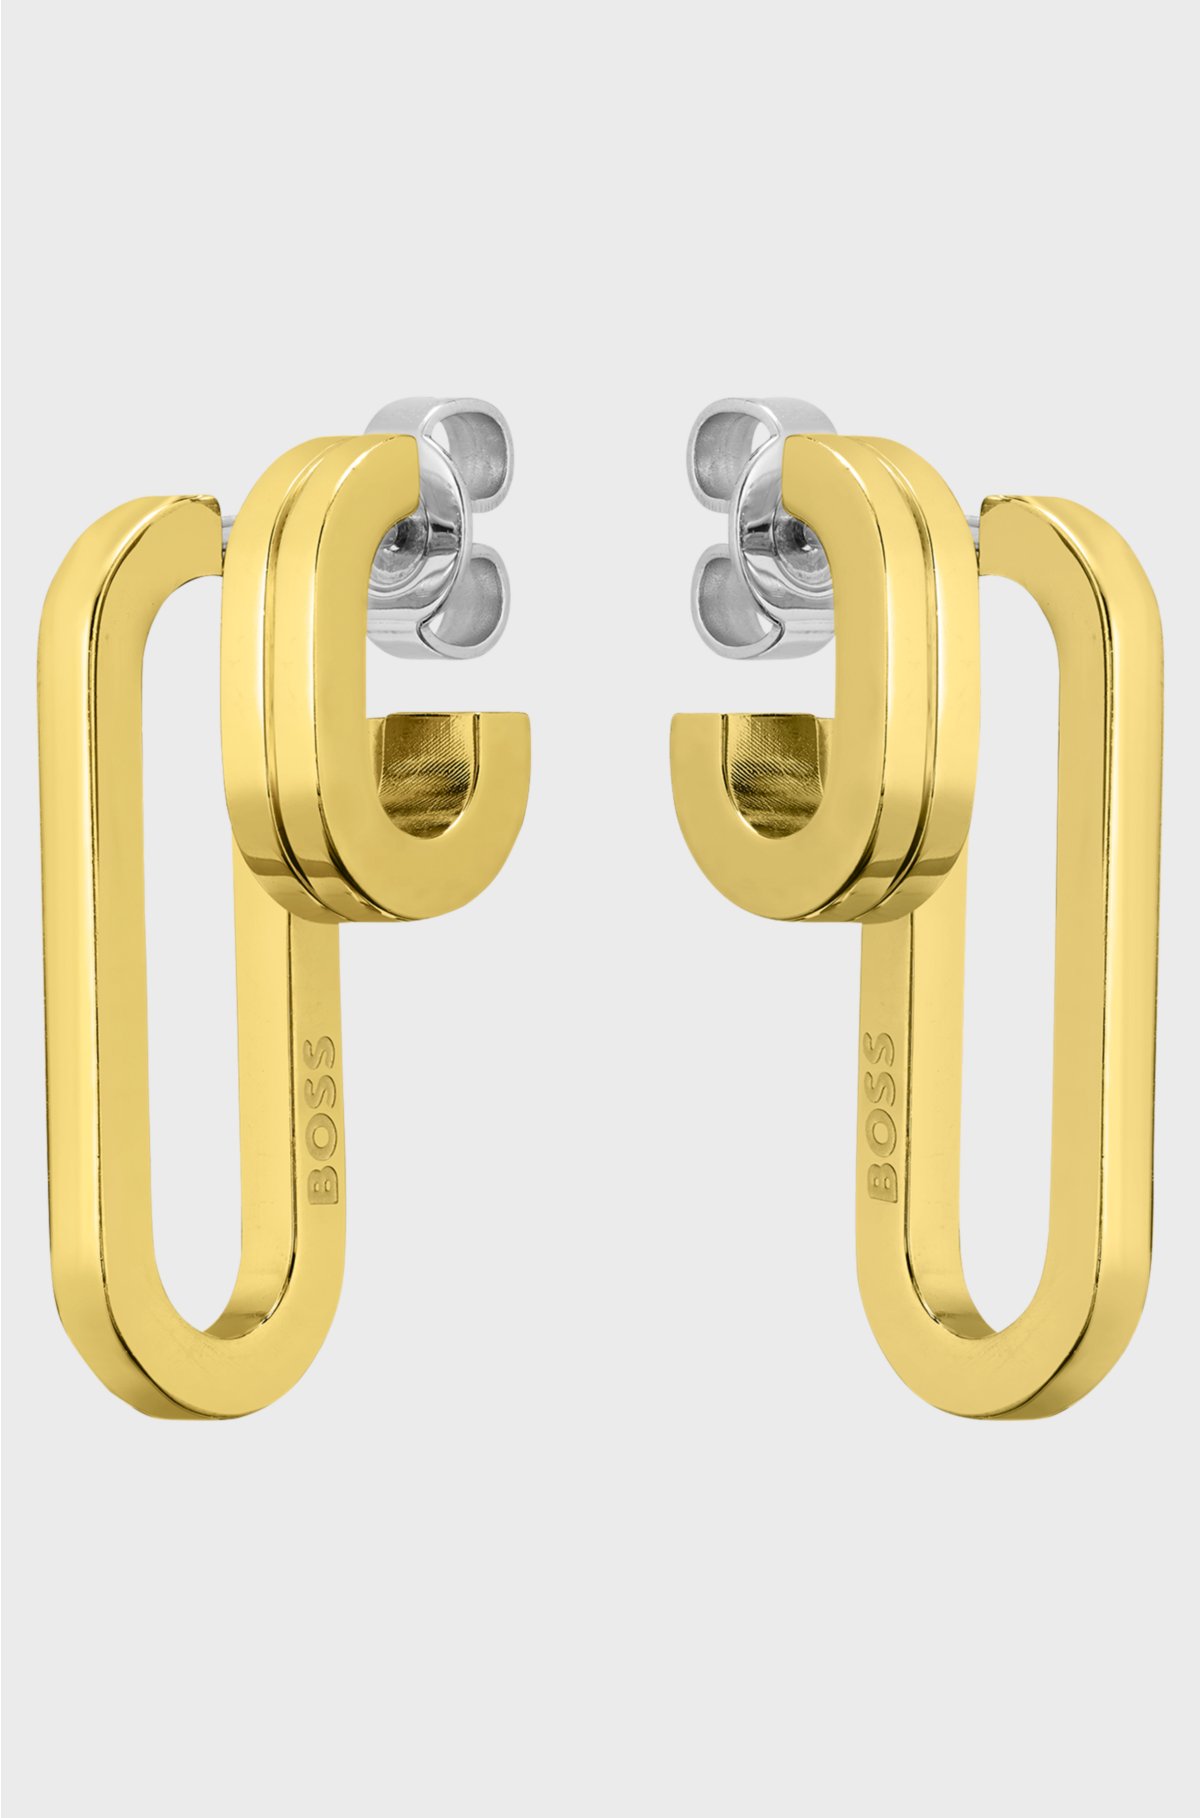 Polished-link earrings with stainless-steel posts, Gold